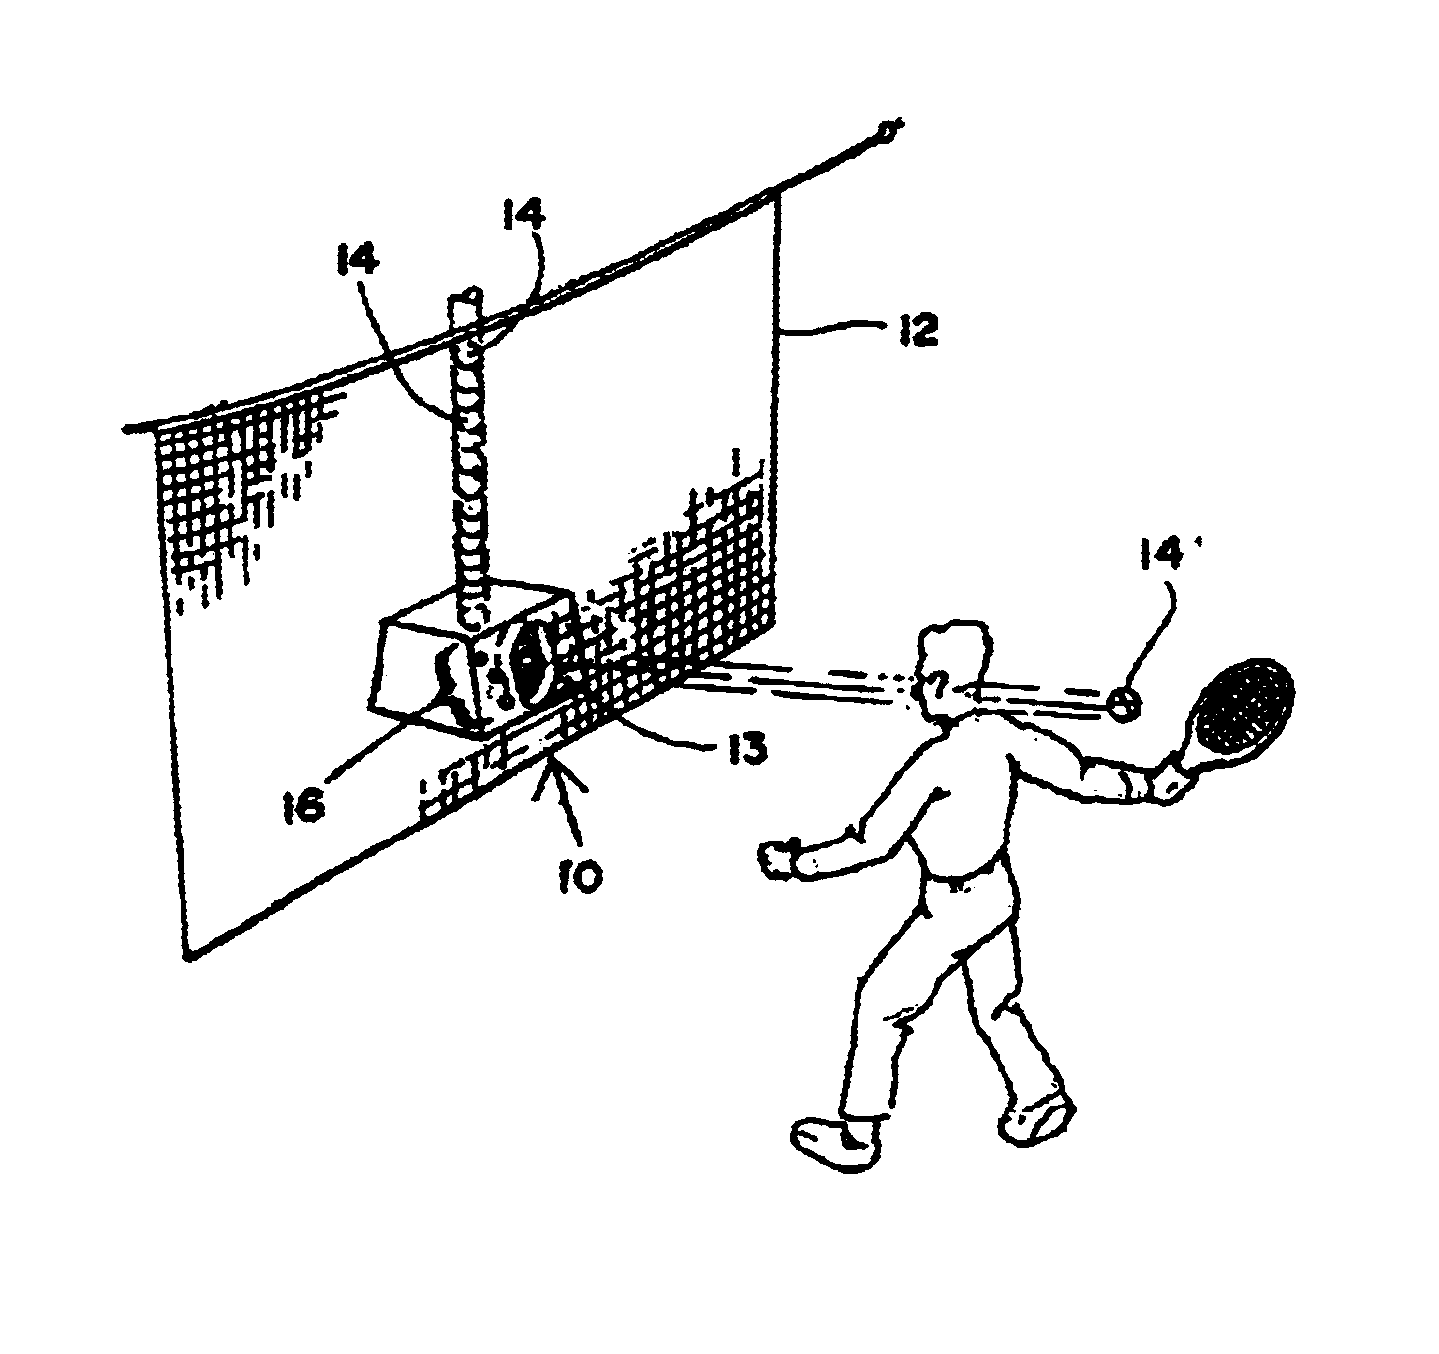 Simulated tennis ball trajectory & delivery system